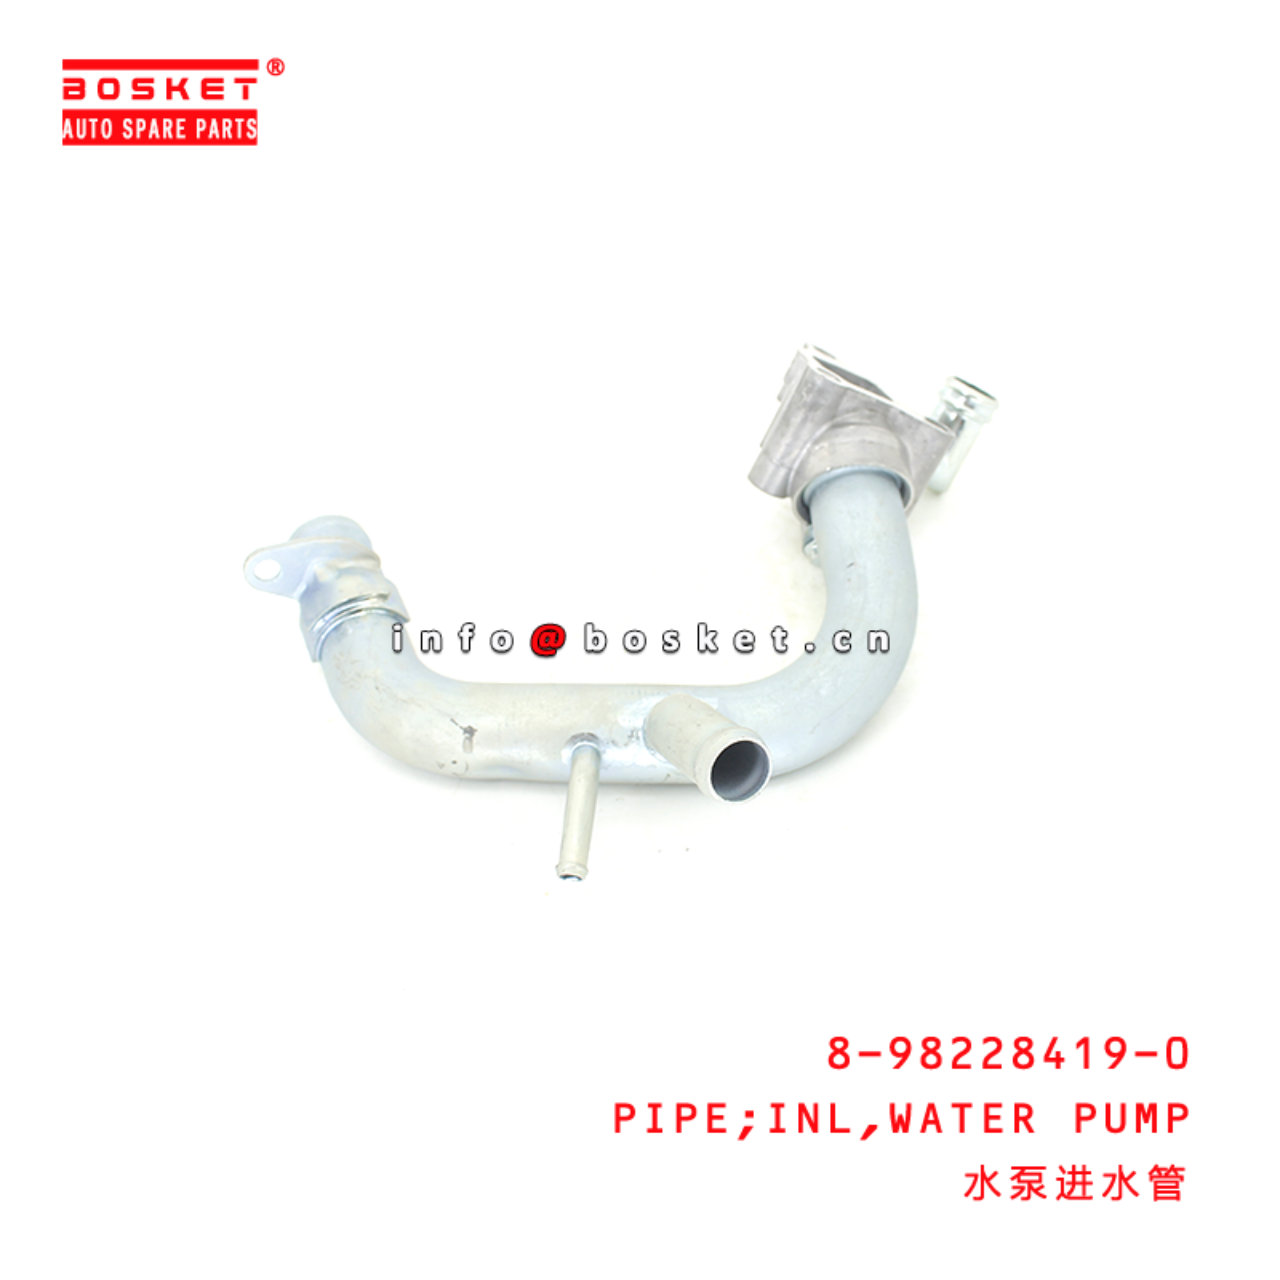 8-98228419-0 Water Pump Inlet Pipe Suitable for ISUZU DMAX 4JJ1 8982284190